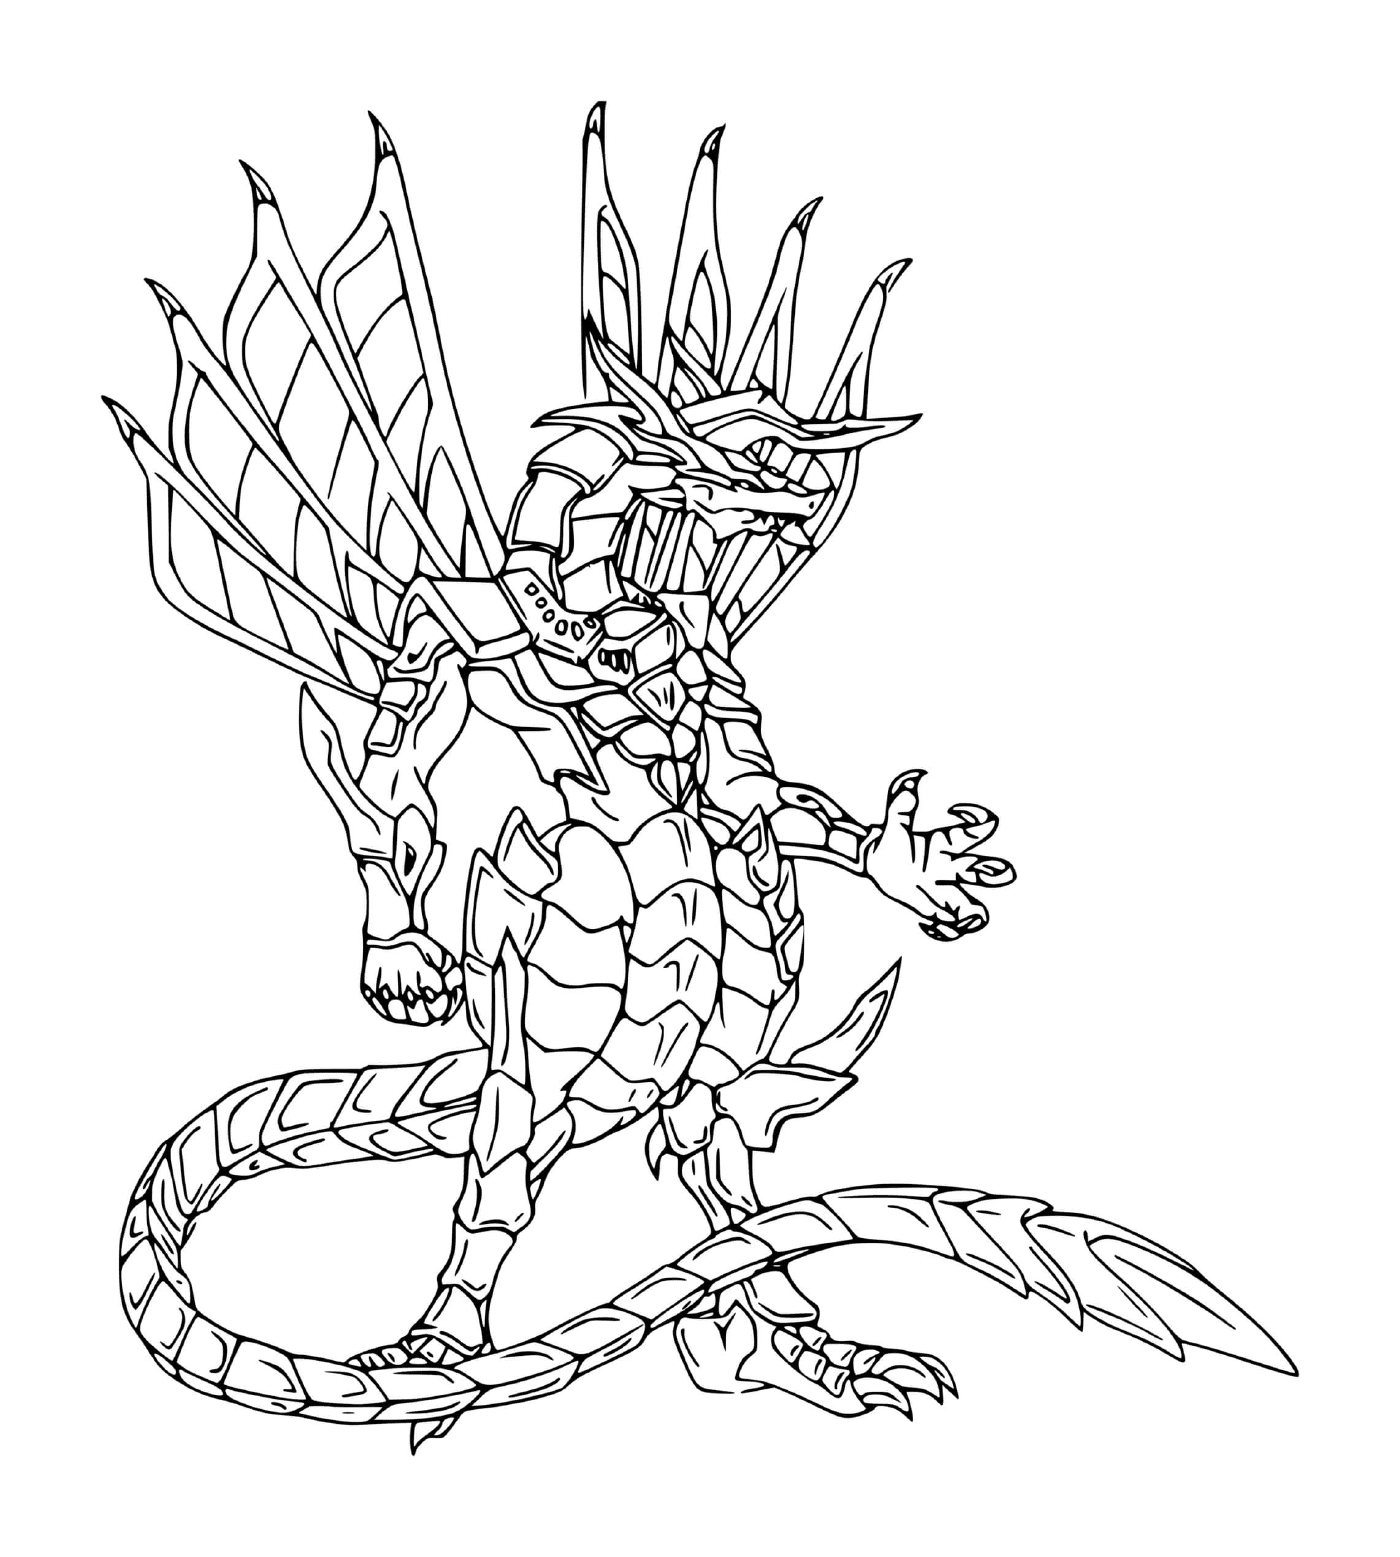  a dragon in drawing 